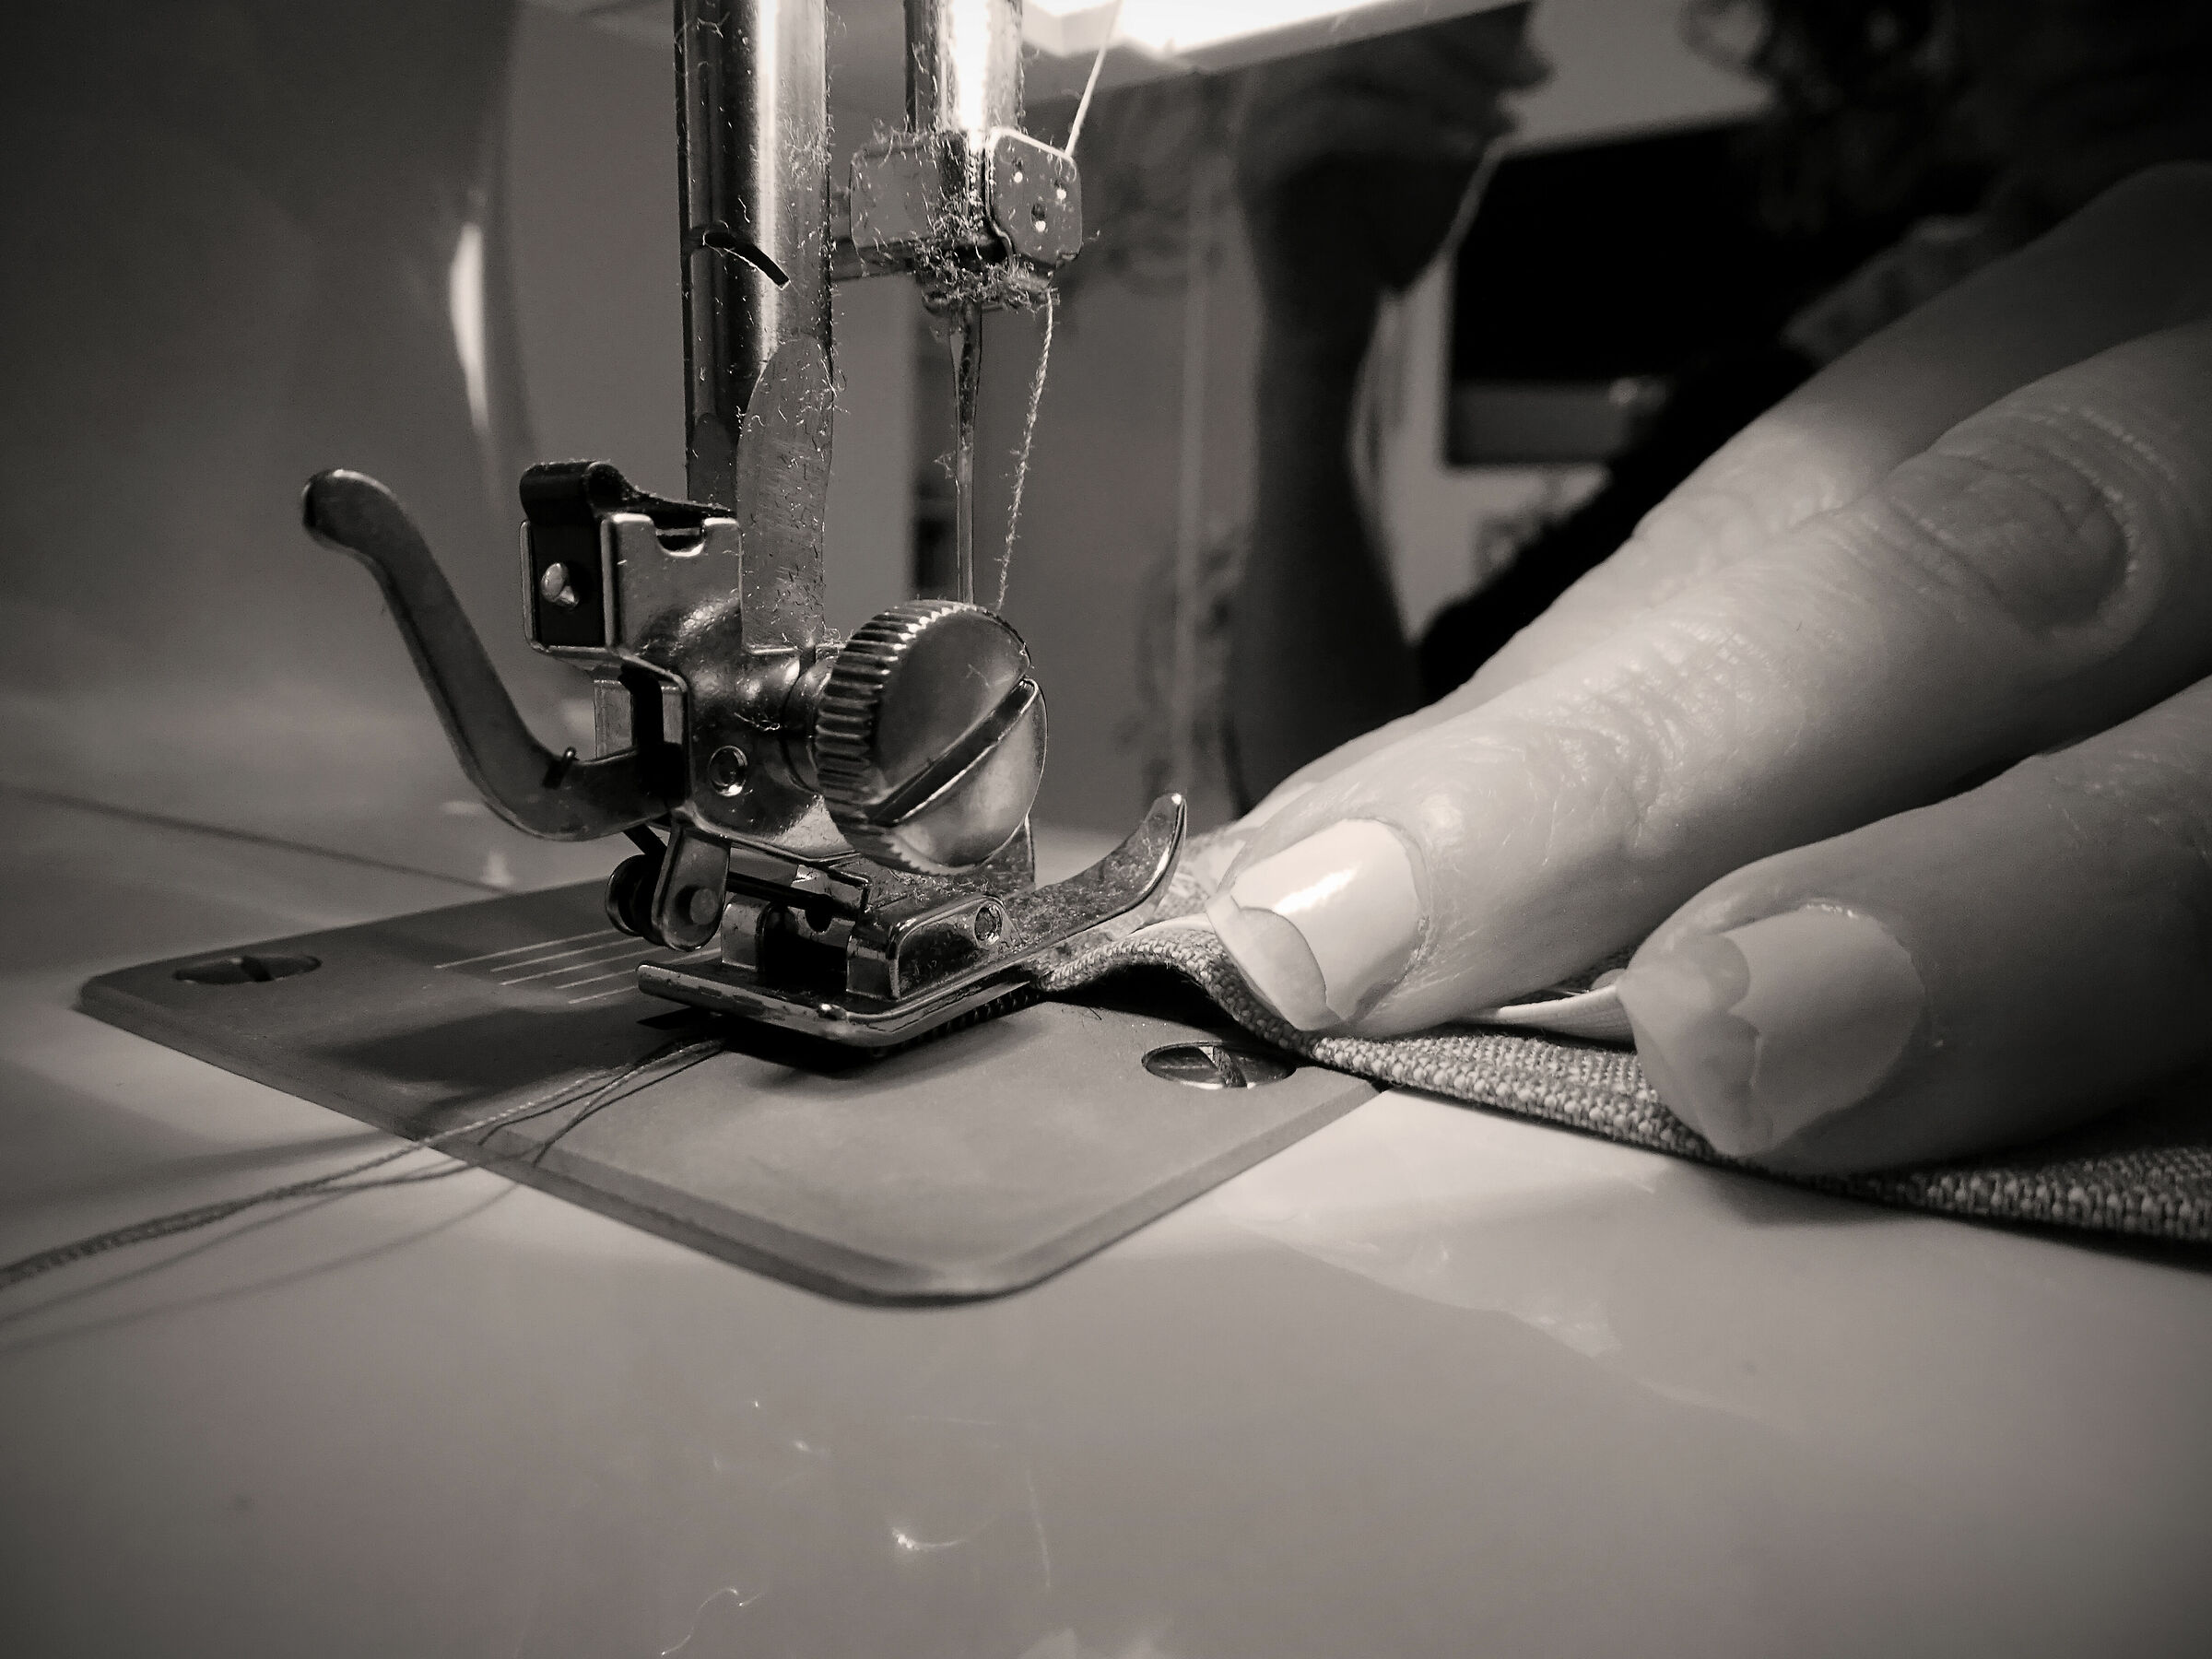 Sewing...